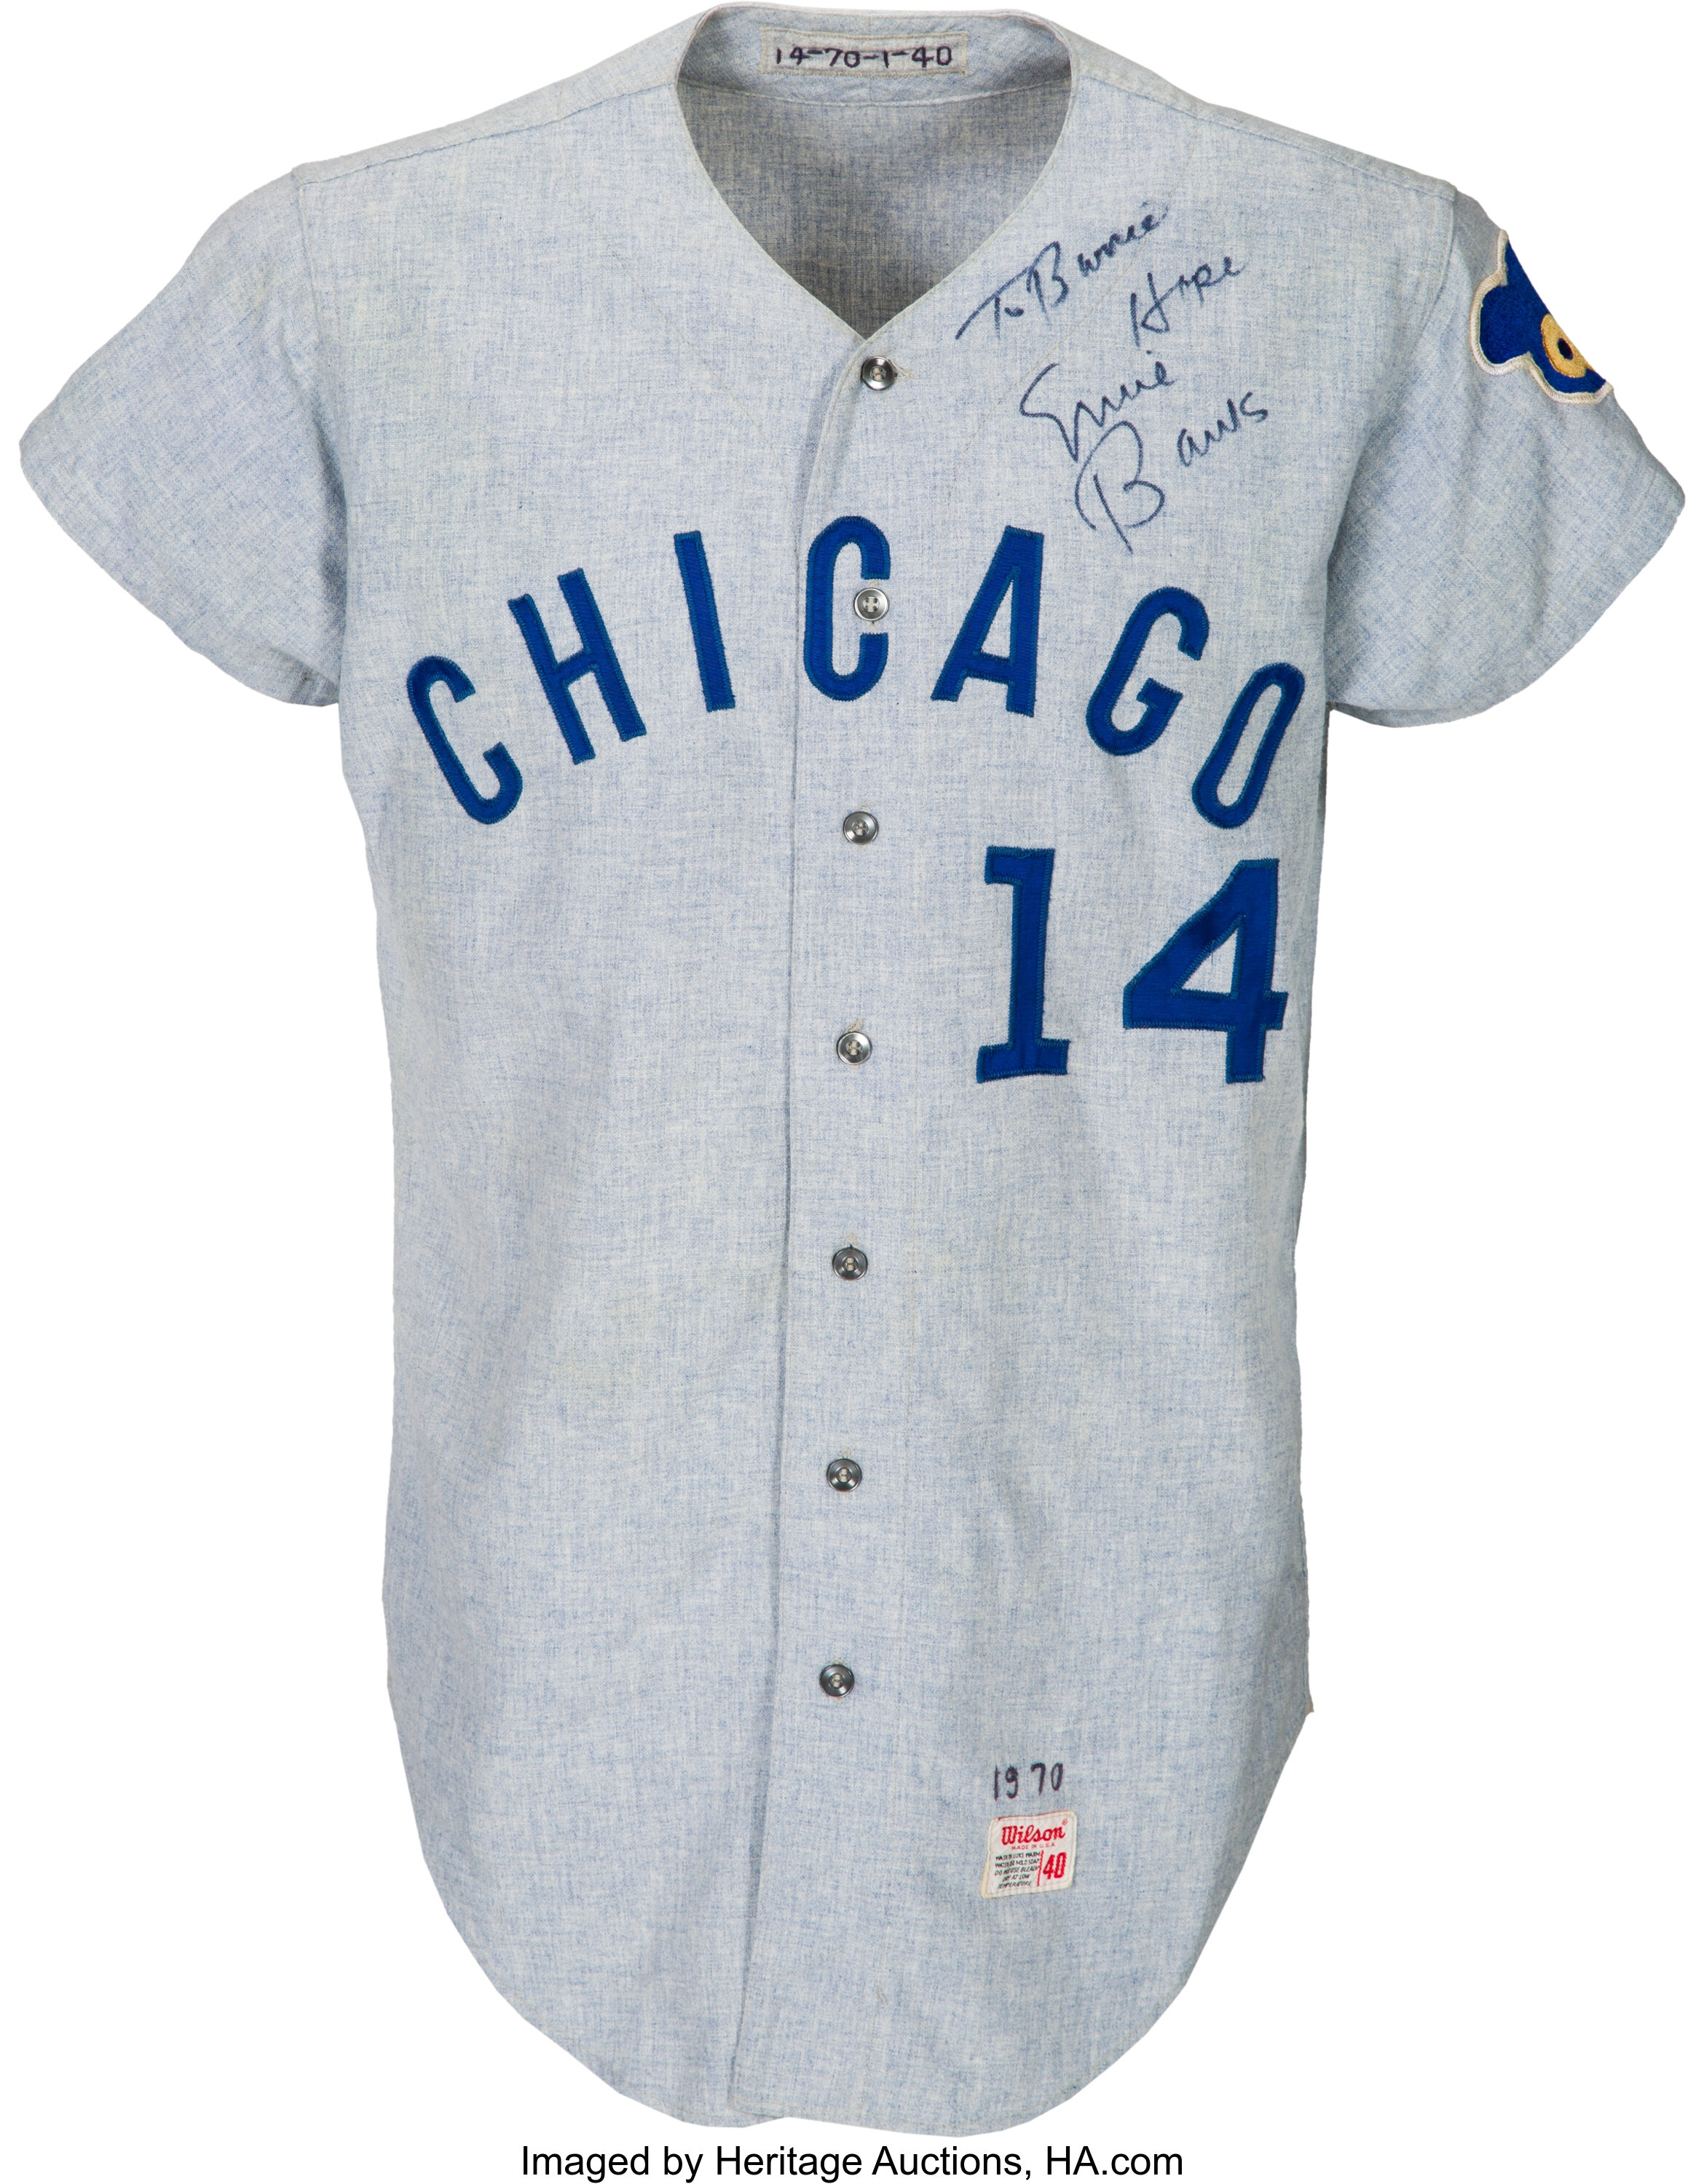 1969 Ernie Banks Signed, Game-Worn Chicago Cubs Jersey Could Set Record  Price - SCP AUCTIONS